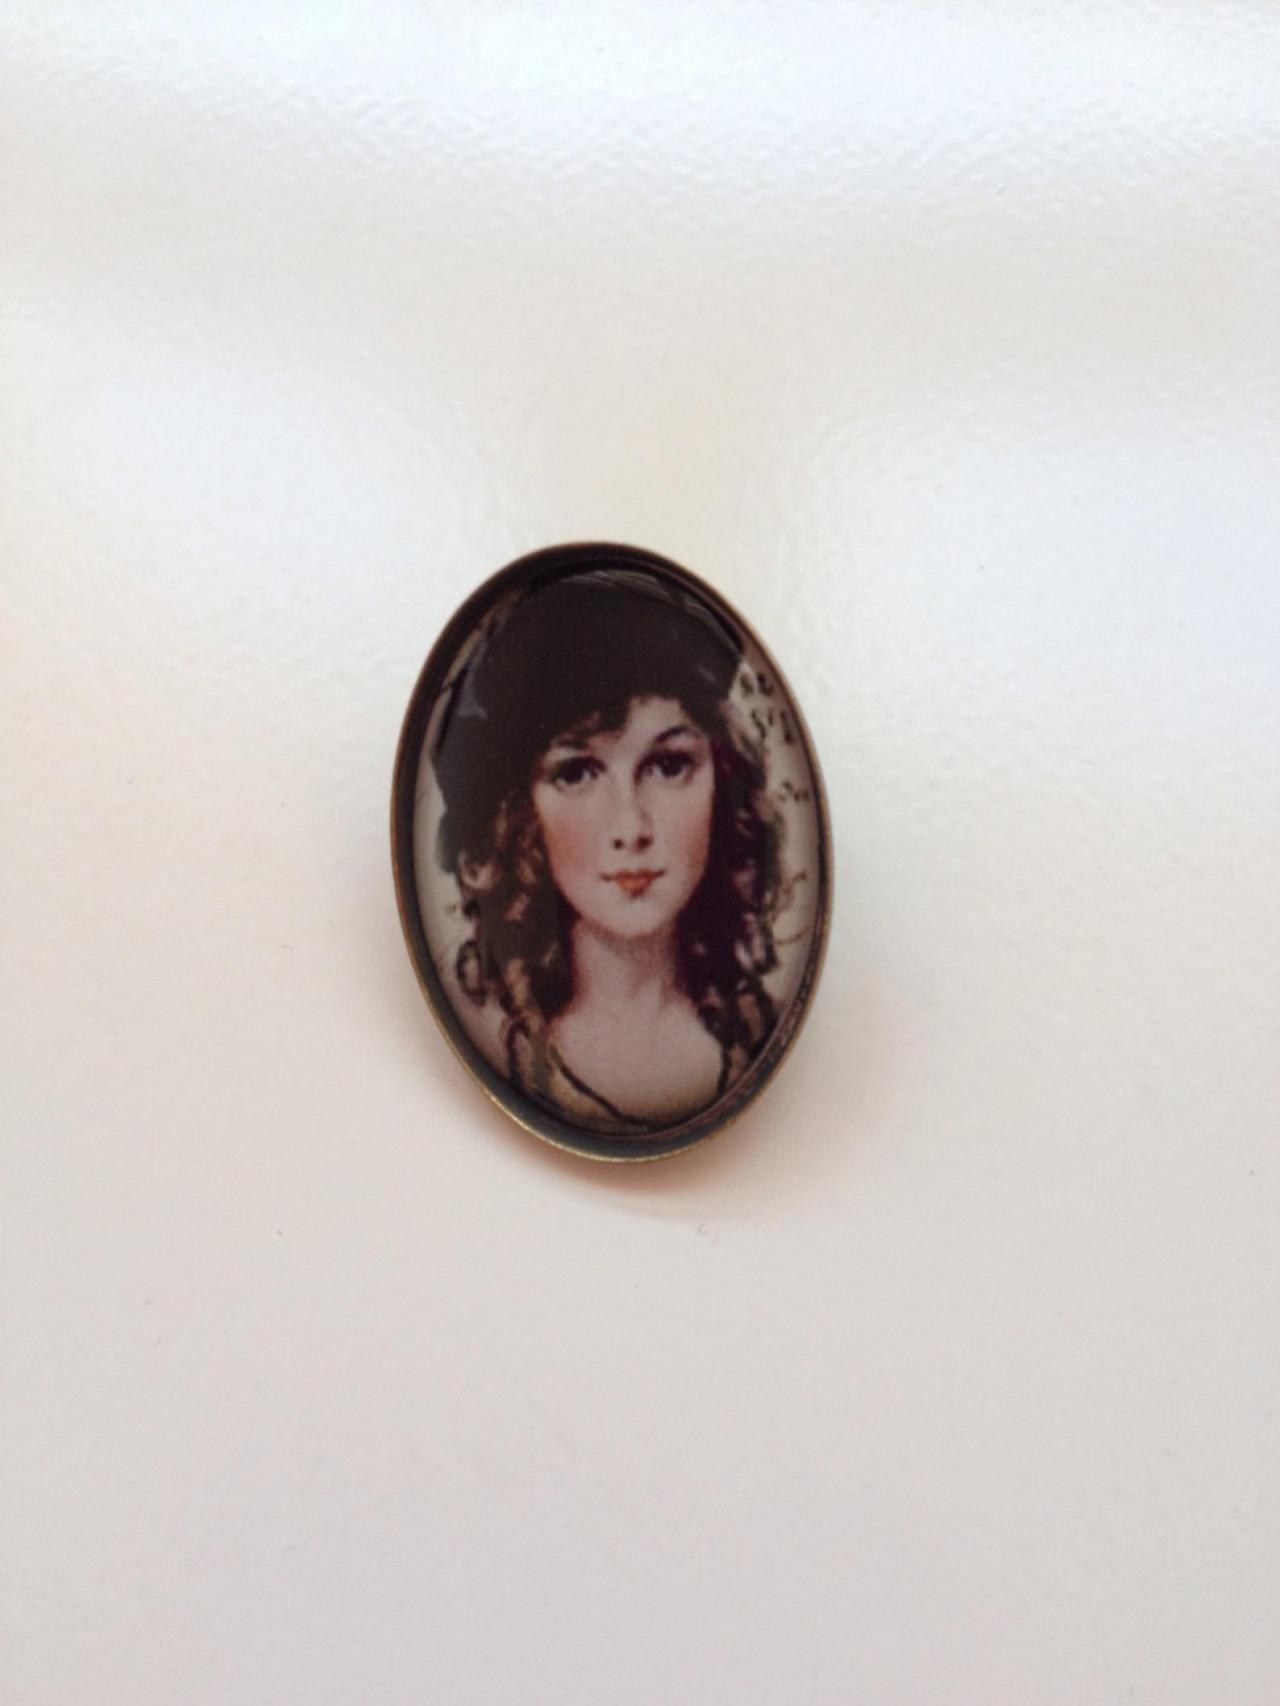 Pin 85 - old school pin old woman image brooch perfect gift vintage style autumn winter fashion